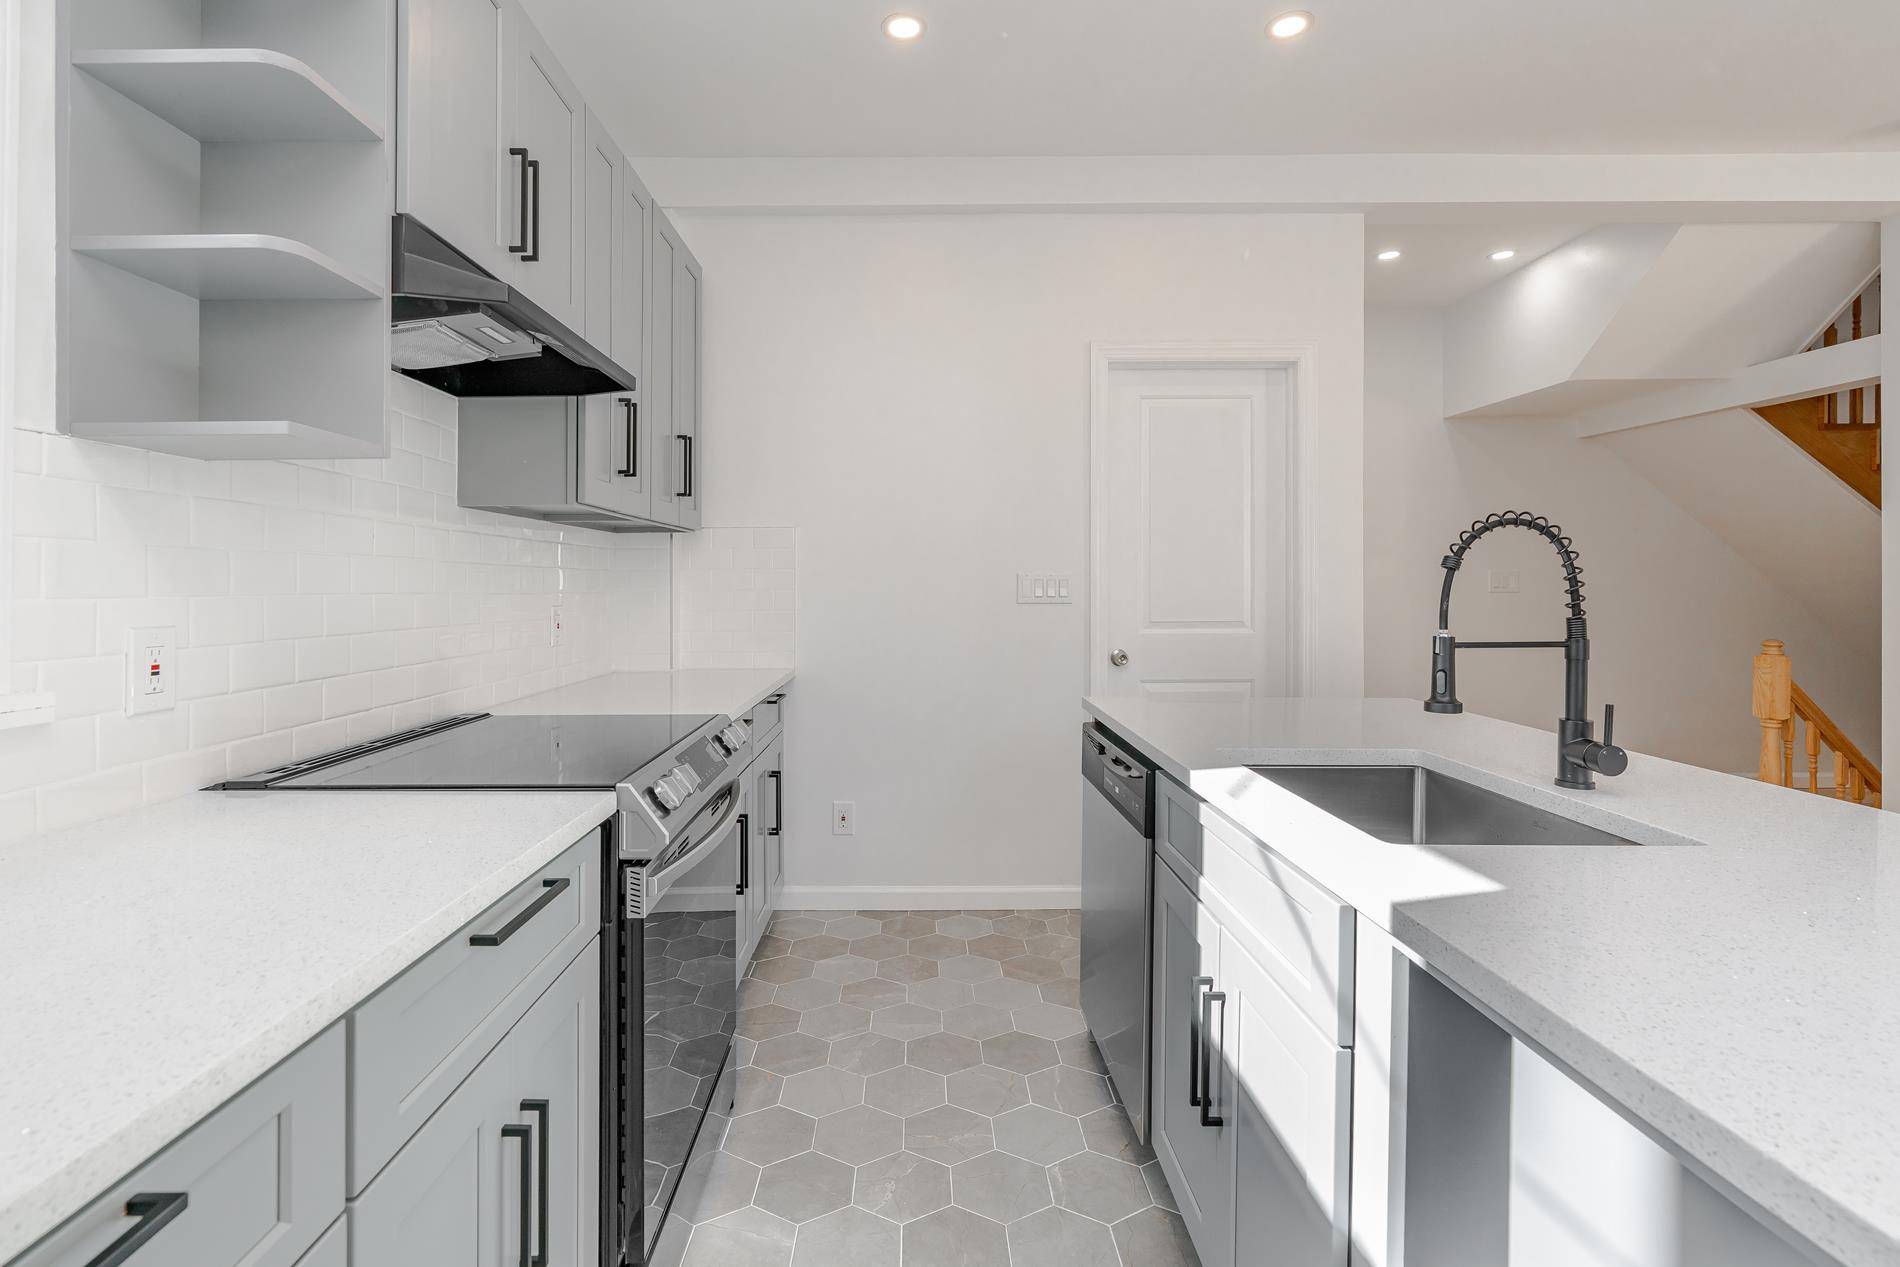 From its unassuming exterior to the eye catching gut renovated interior, this beautifully done single family home will leave you the envy of your neighbors and friends alike.